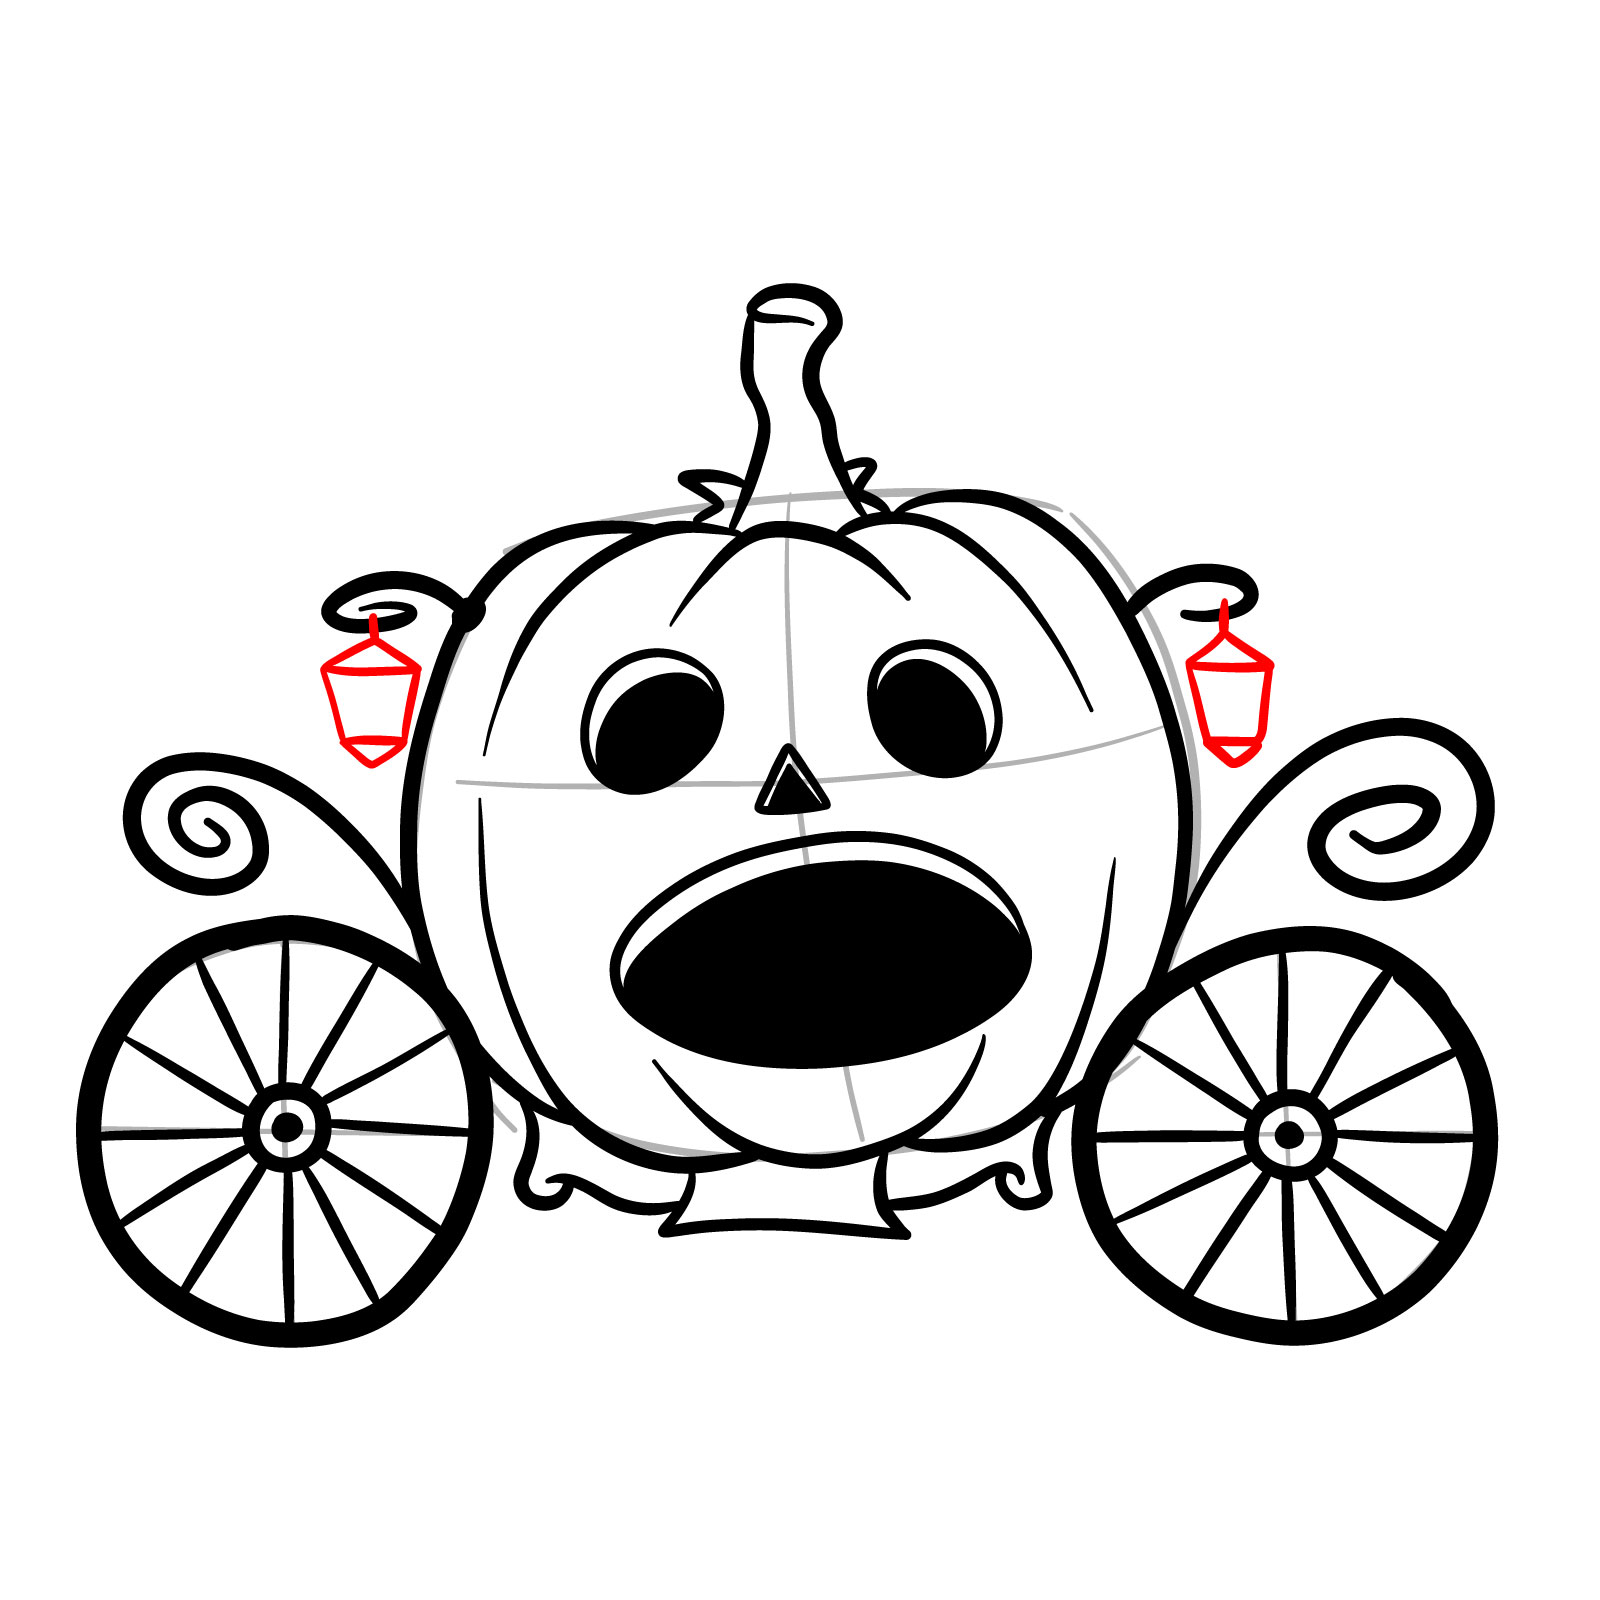 How to draw a Pumpkin Carriage - step 16